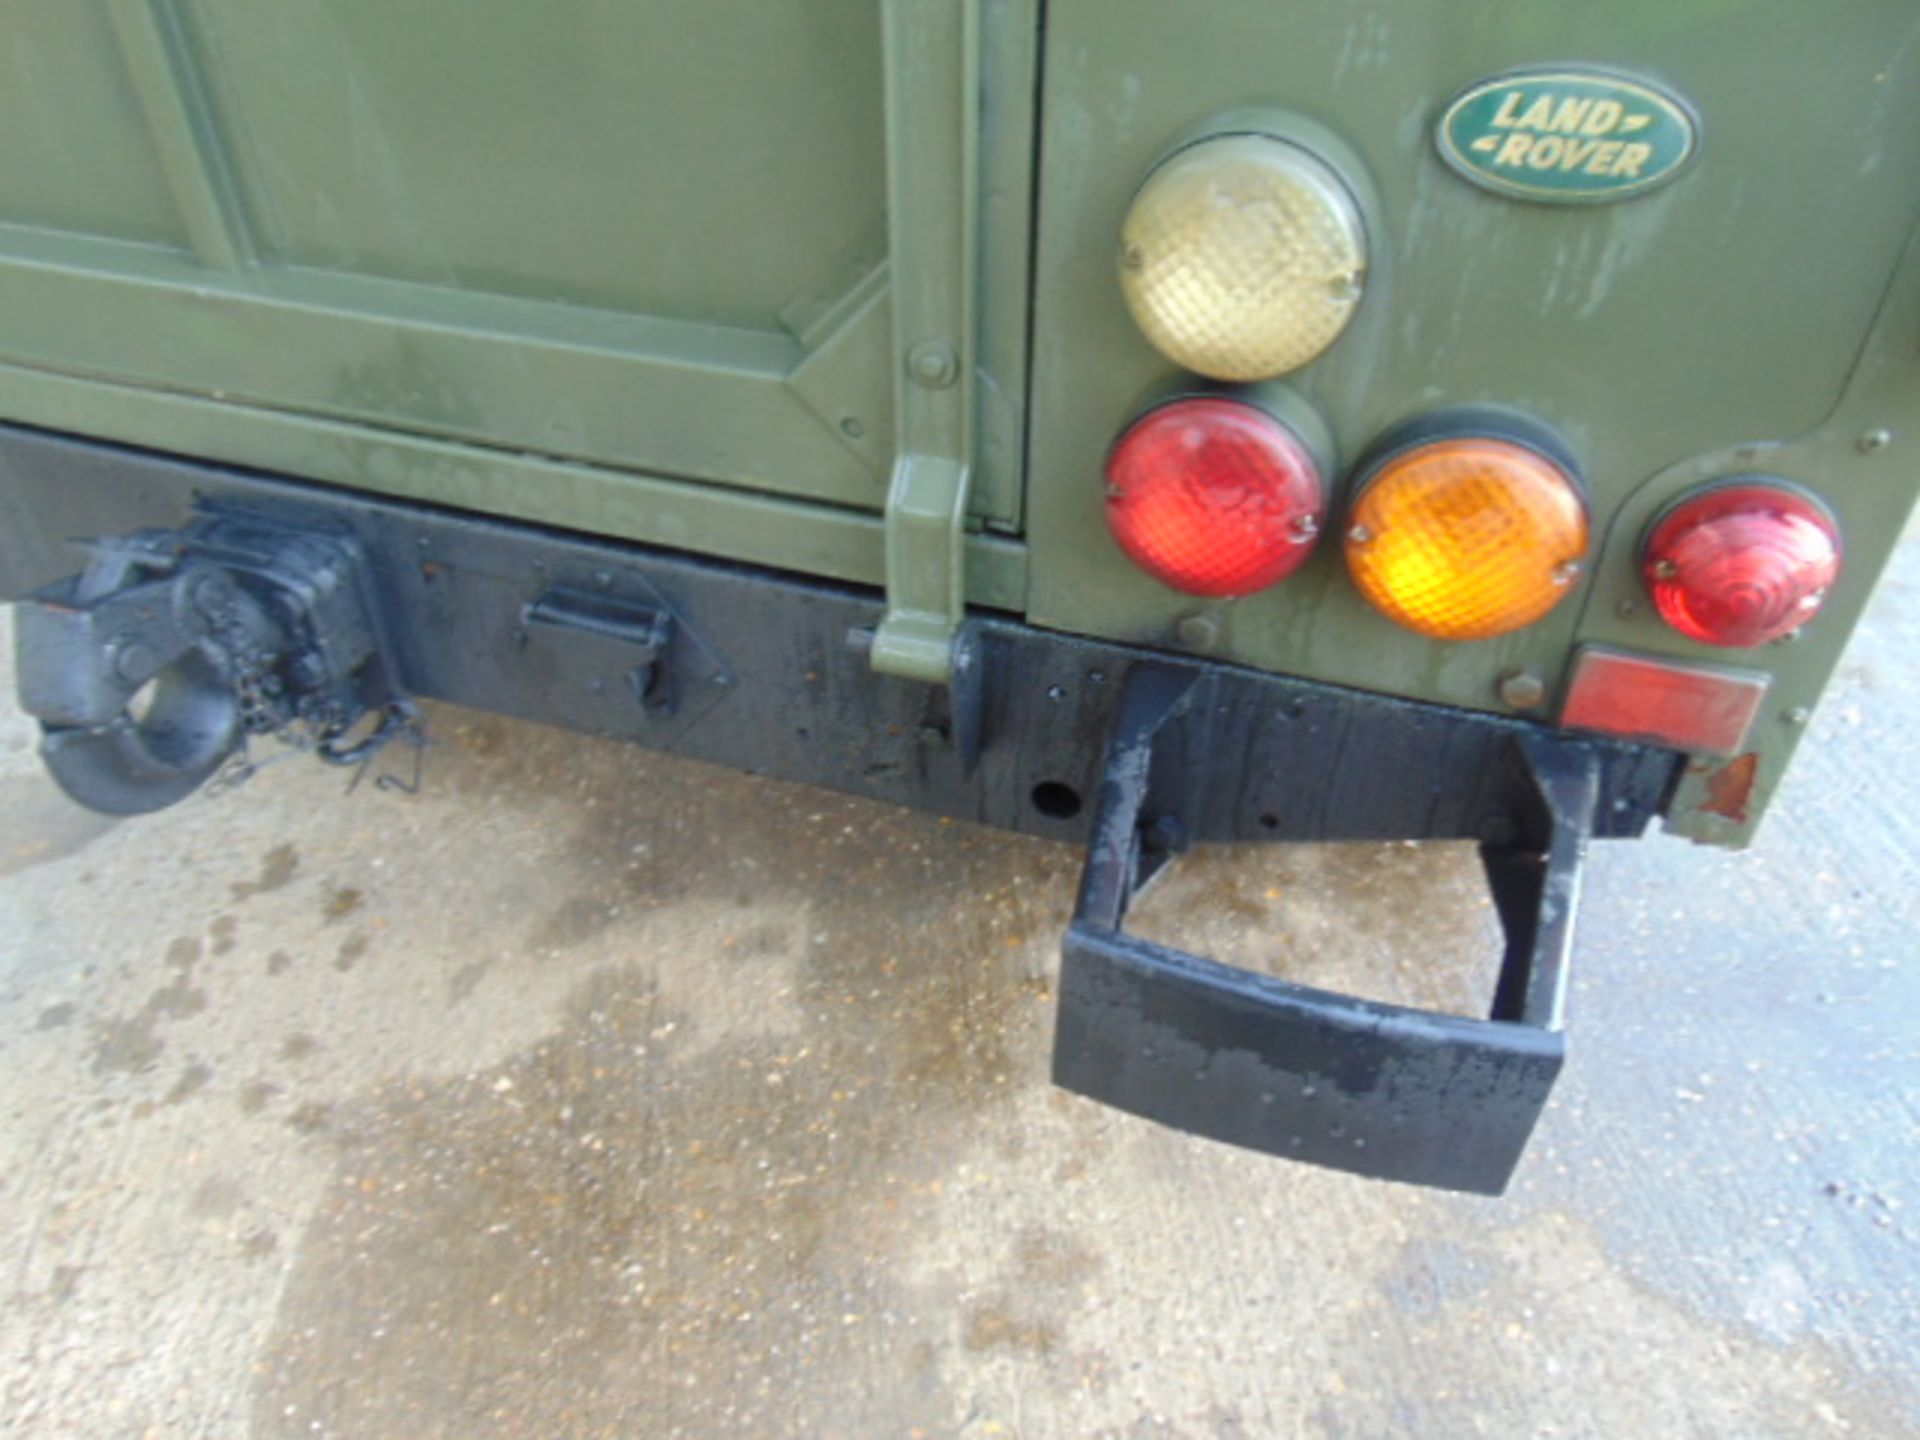 Military Specification Land Rover Wolf 110 Soft Top FFR - Image 18 of 25